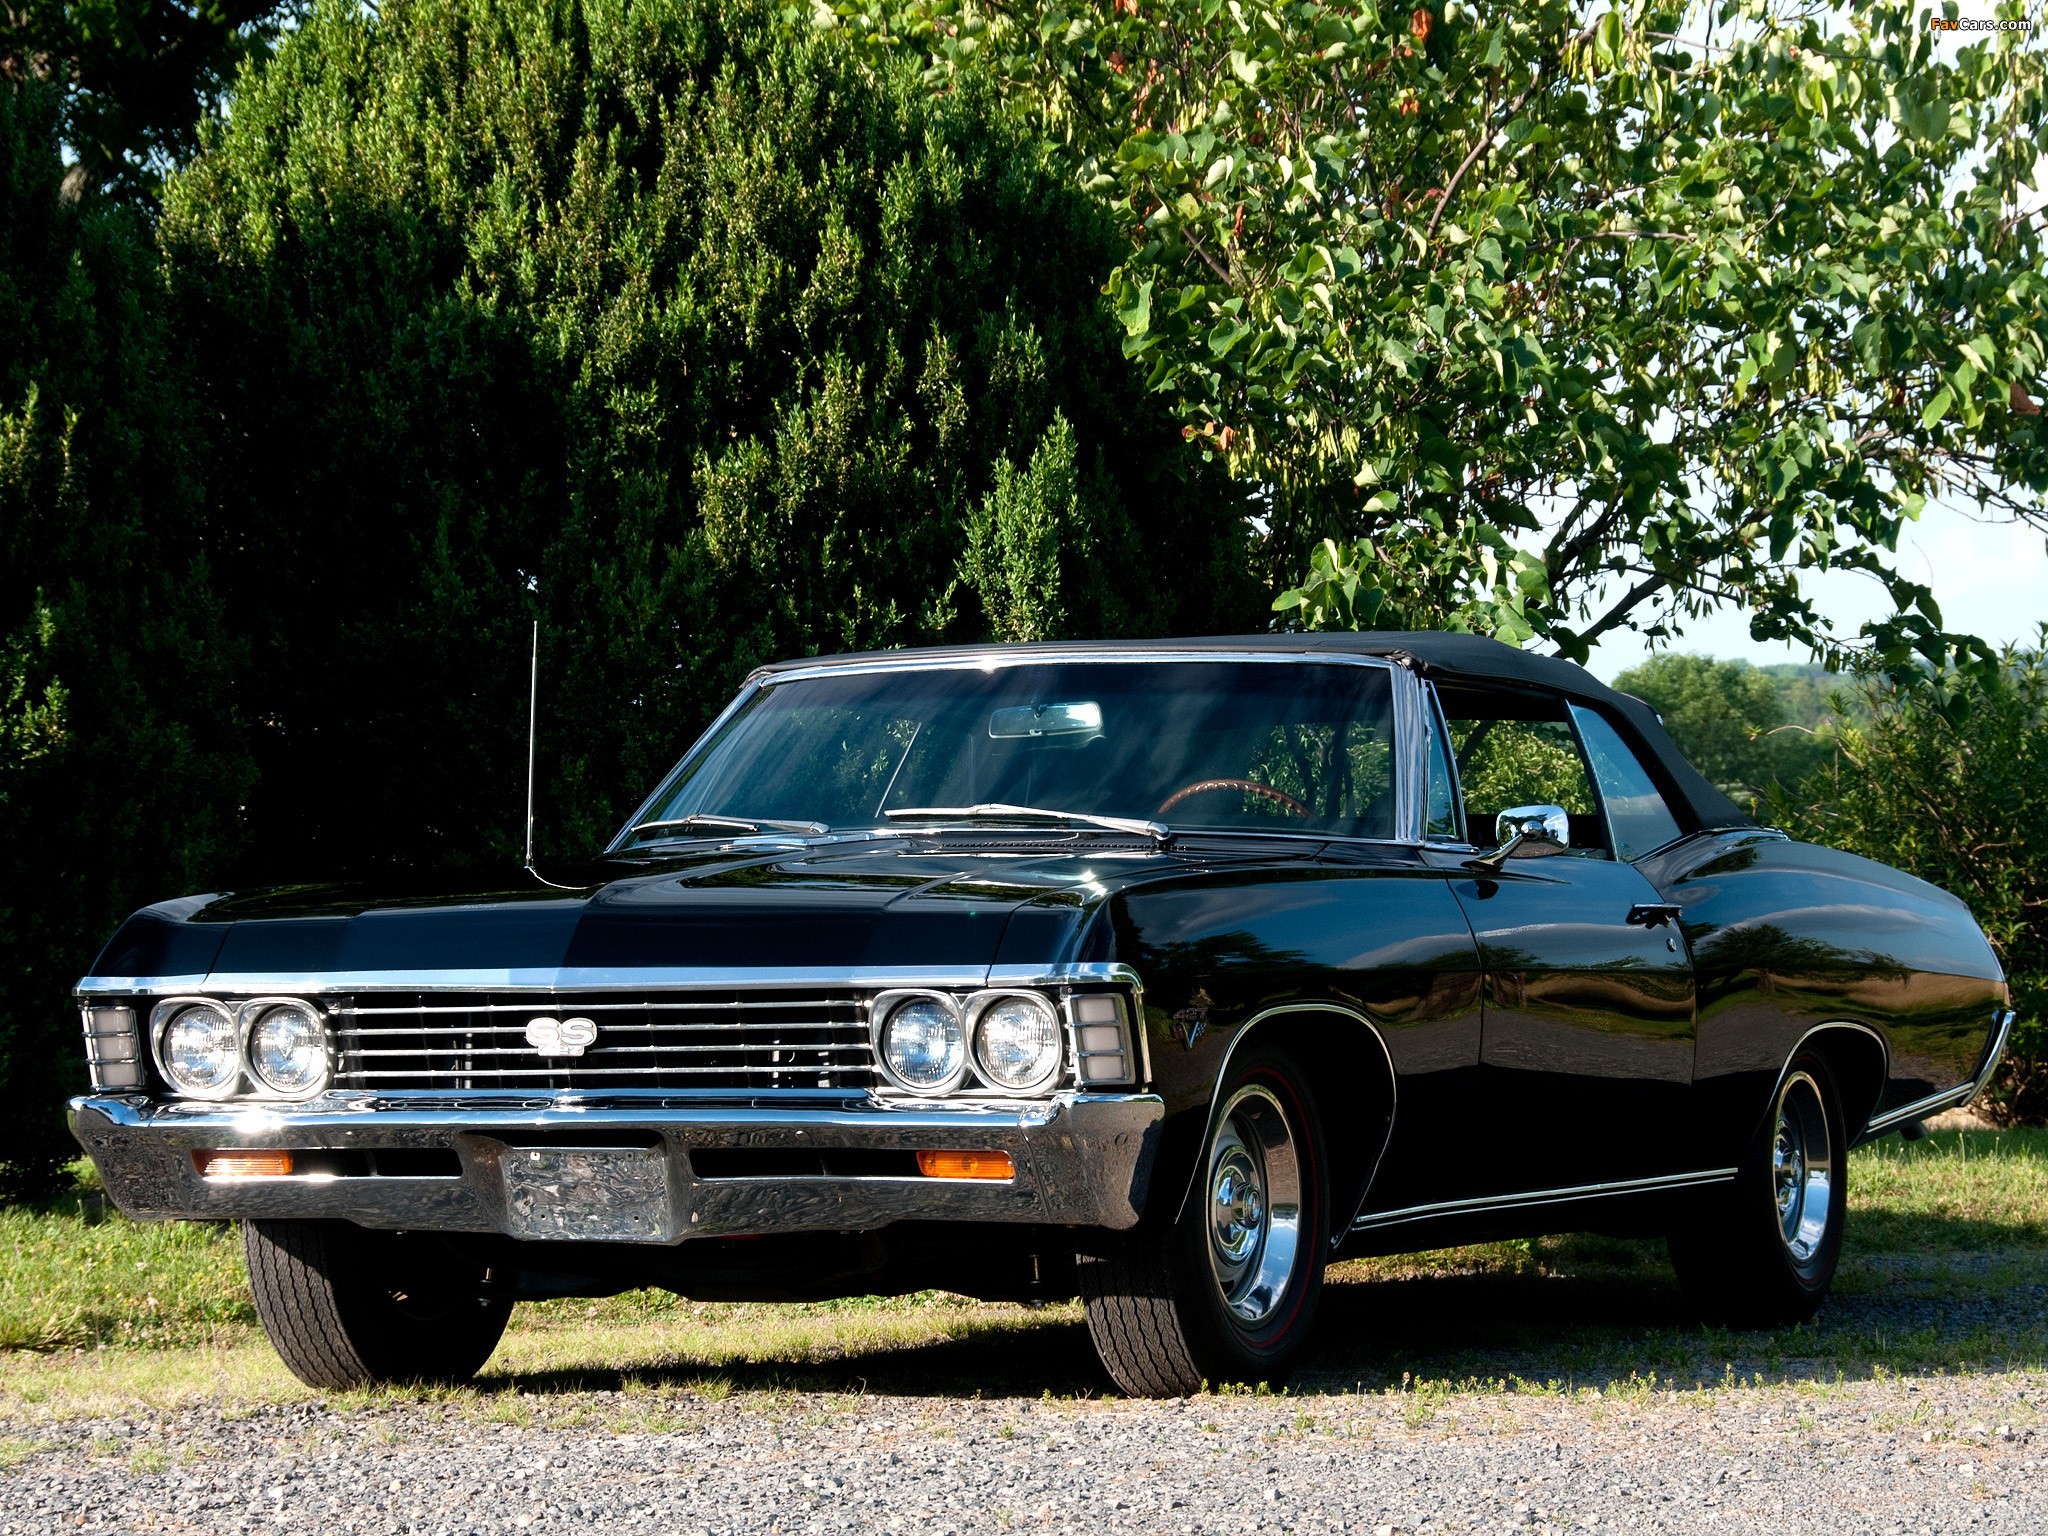 Wallpapers Of Chevrolet Impala